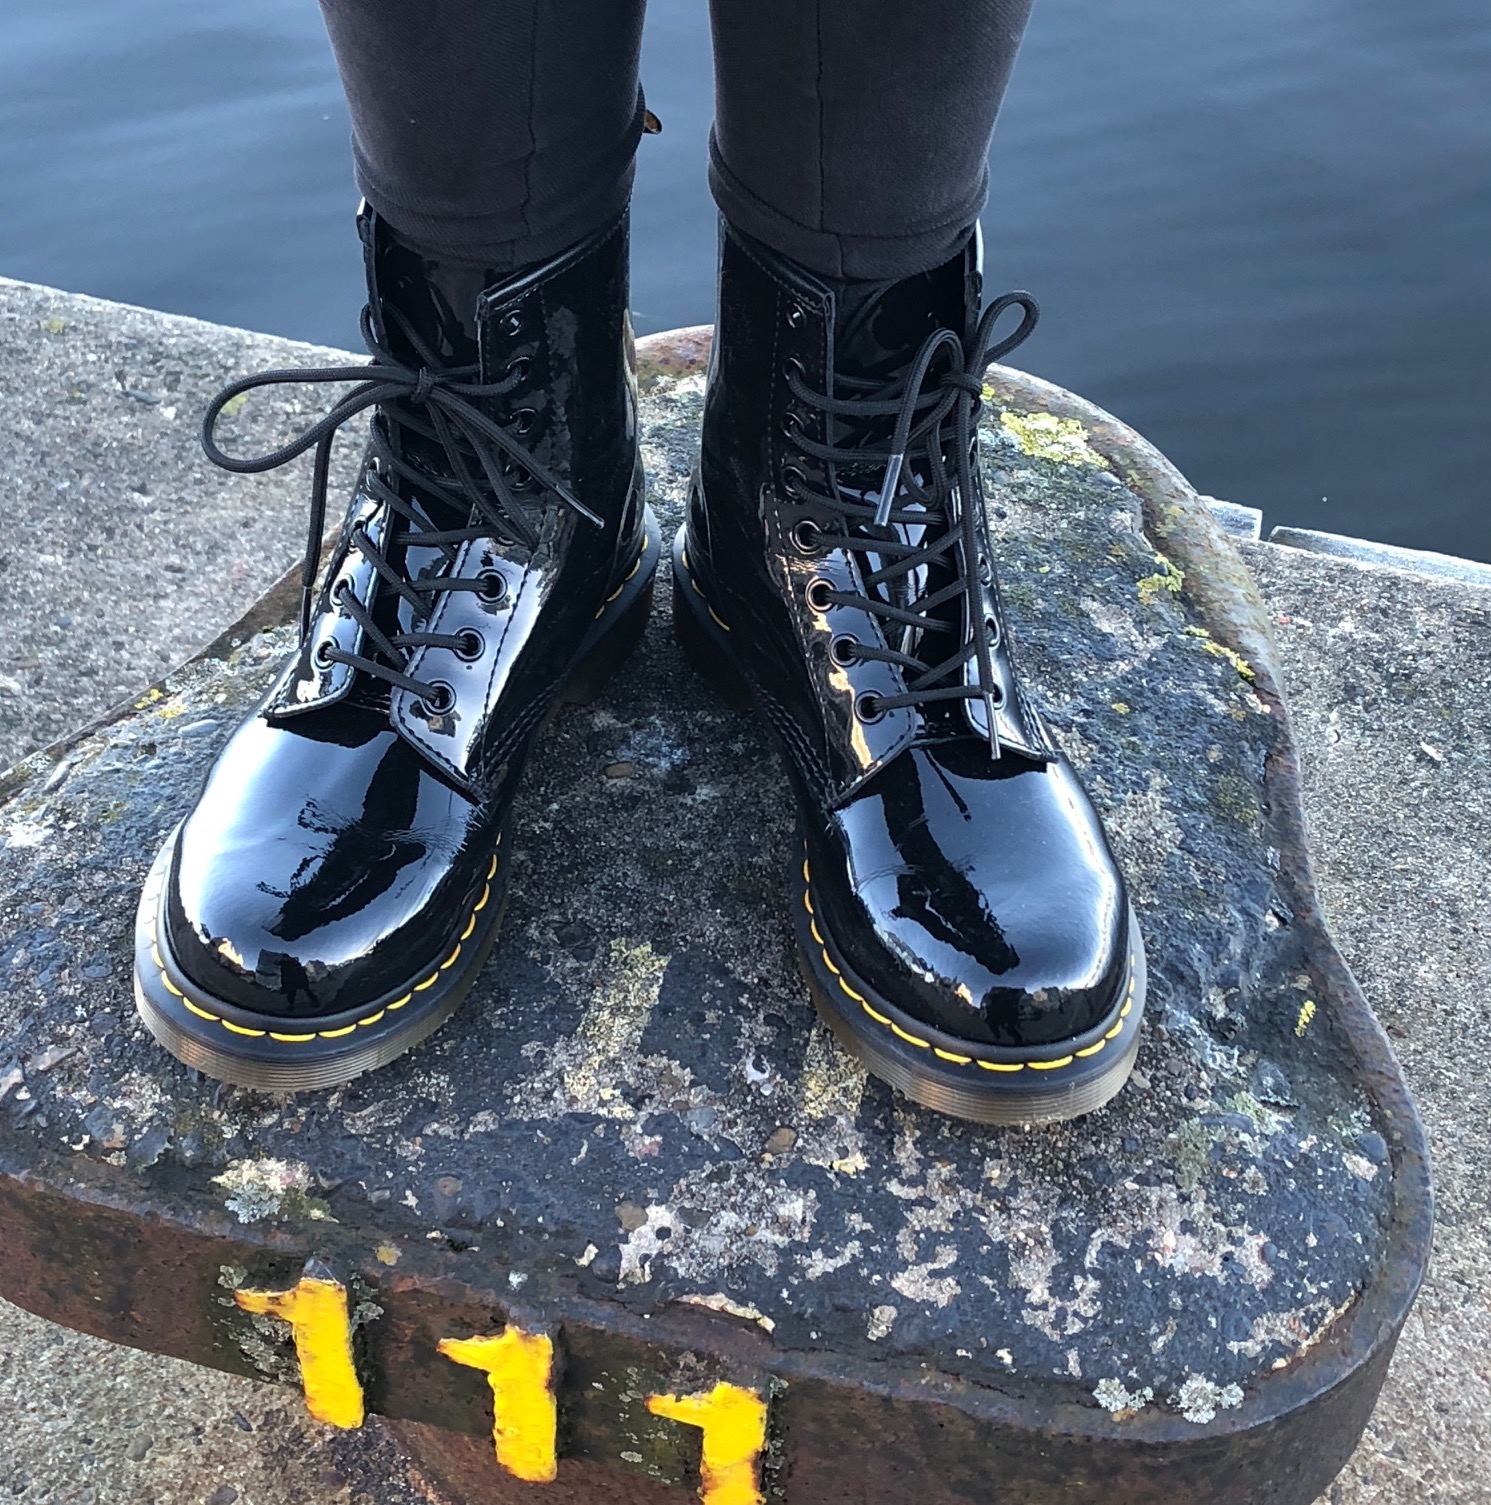 Dr Martens boots by the Fjord